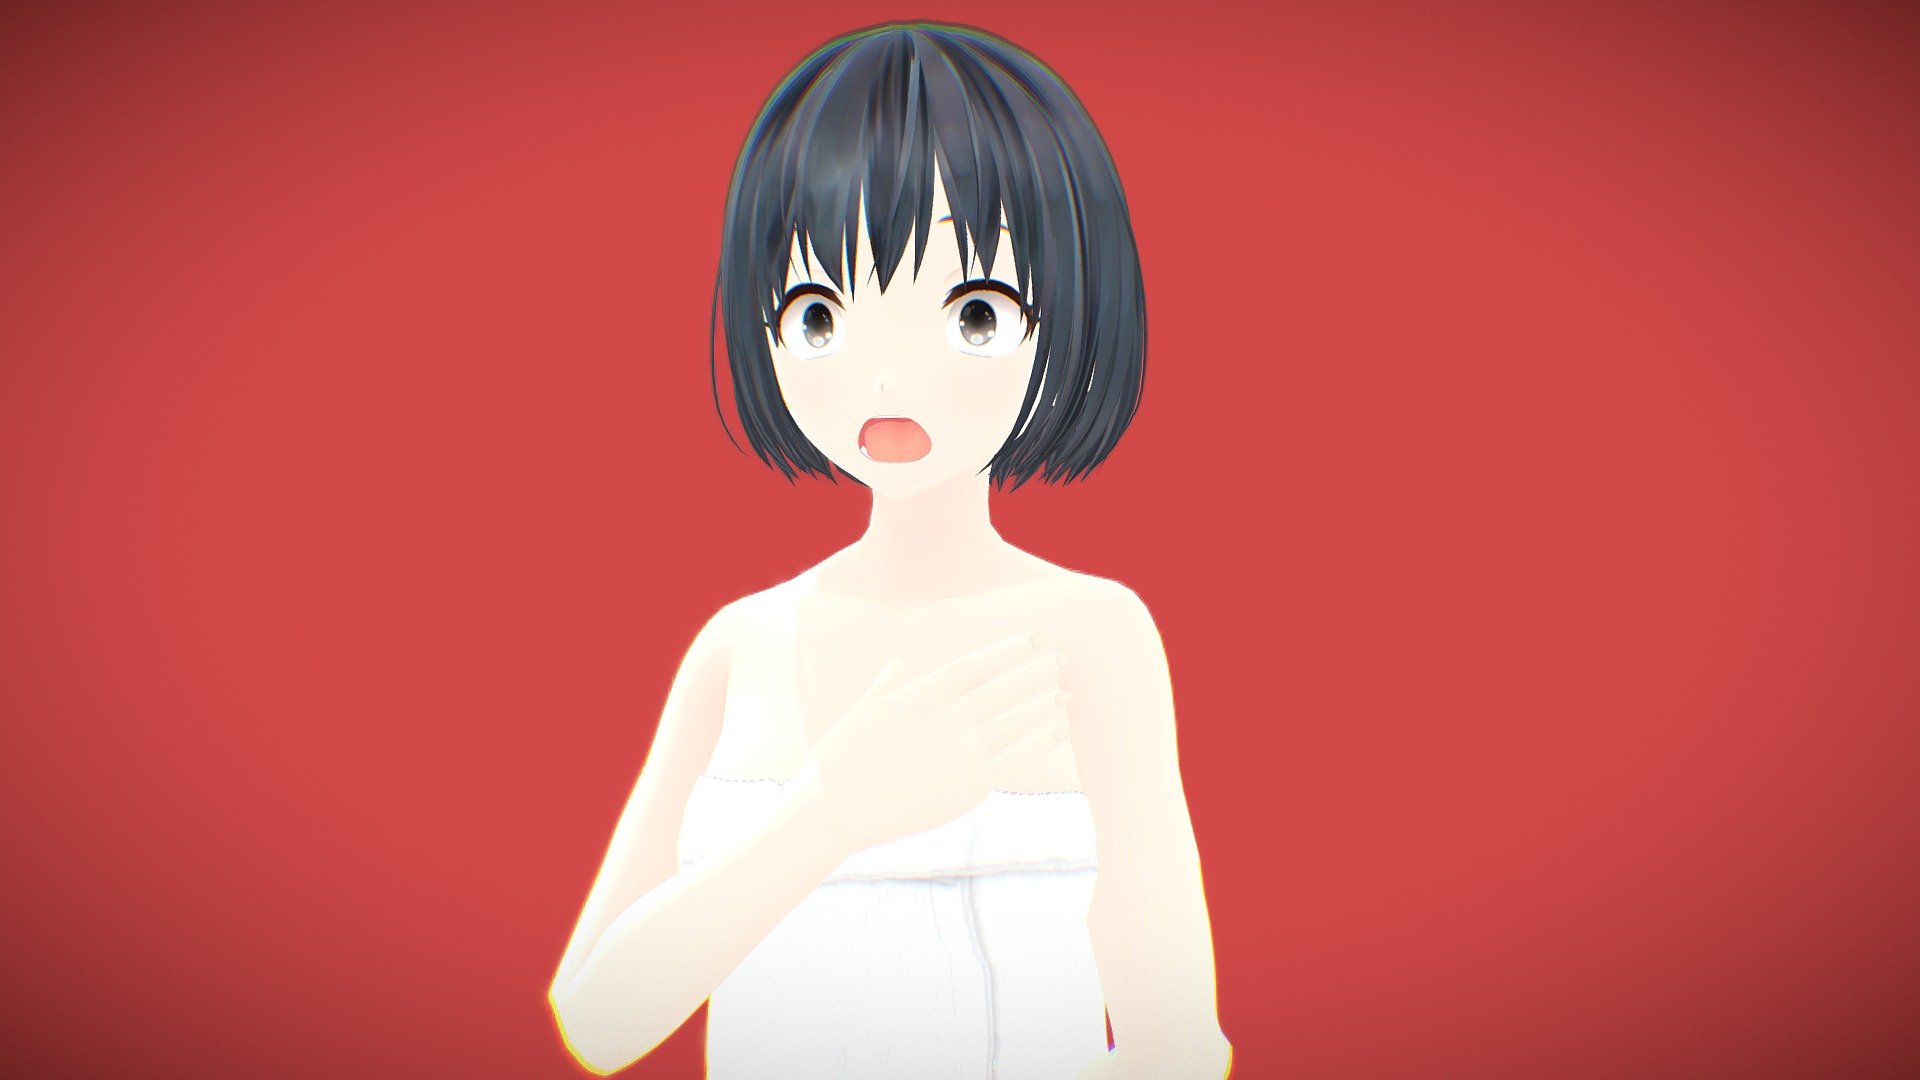 This is 3d Model of Anime Girl Kazuko
* Rigged - Yes
* Facial Expression - Yes

FAQ
Q. is she From an Anime?
A. No, she is a OC.

Q. How to Change Facial Expressions?
Ans. To change the facial Expressions of the Model simply choese the model's head and go to &ldquo;Object Data Properties